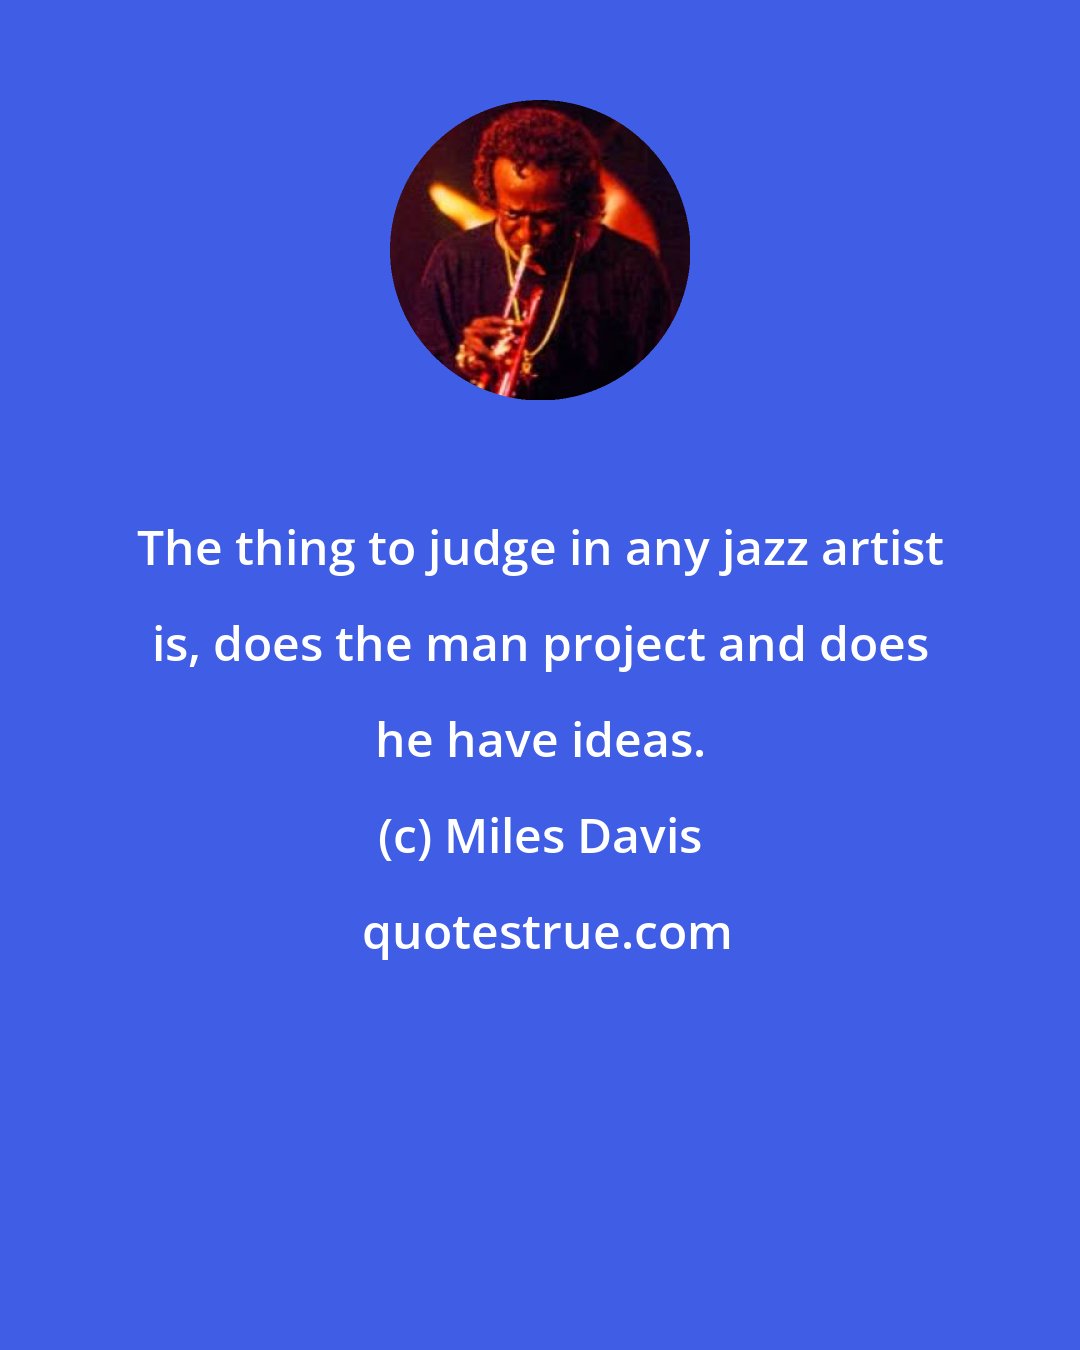 Miles Davis: The thing to judge in any jazz artist is, does the man project and does he have ideas.